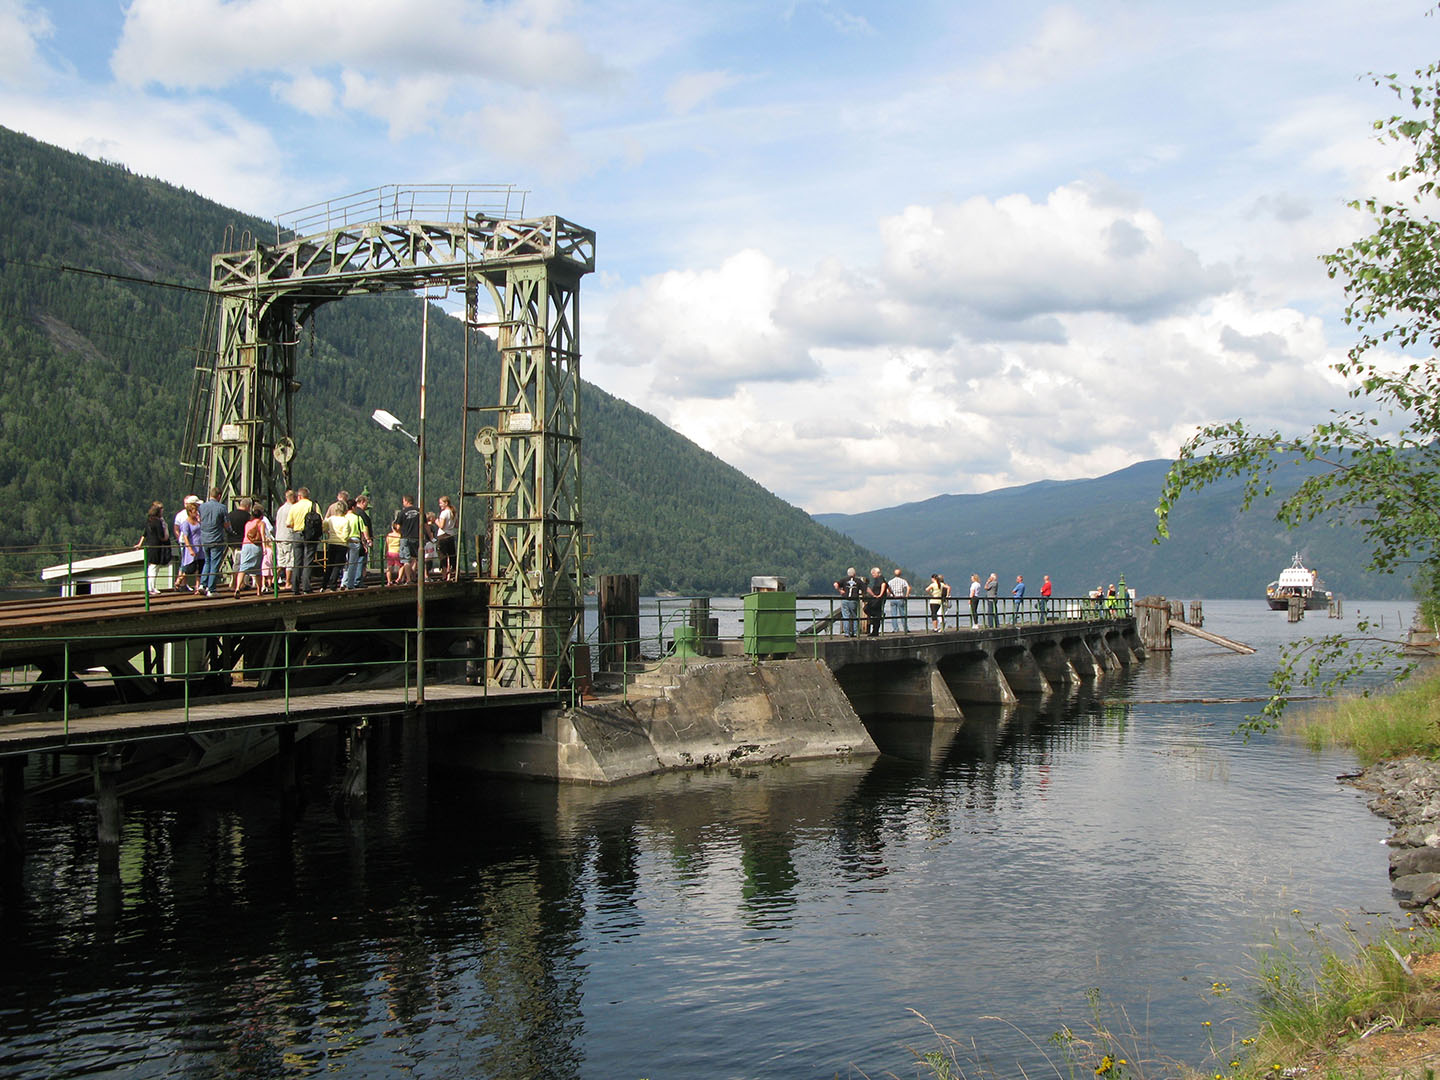 Ferry quay on the Rjukan Line. Photo: Sverre Nordmo, the Directorate for Cultural Heritage